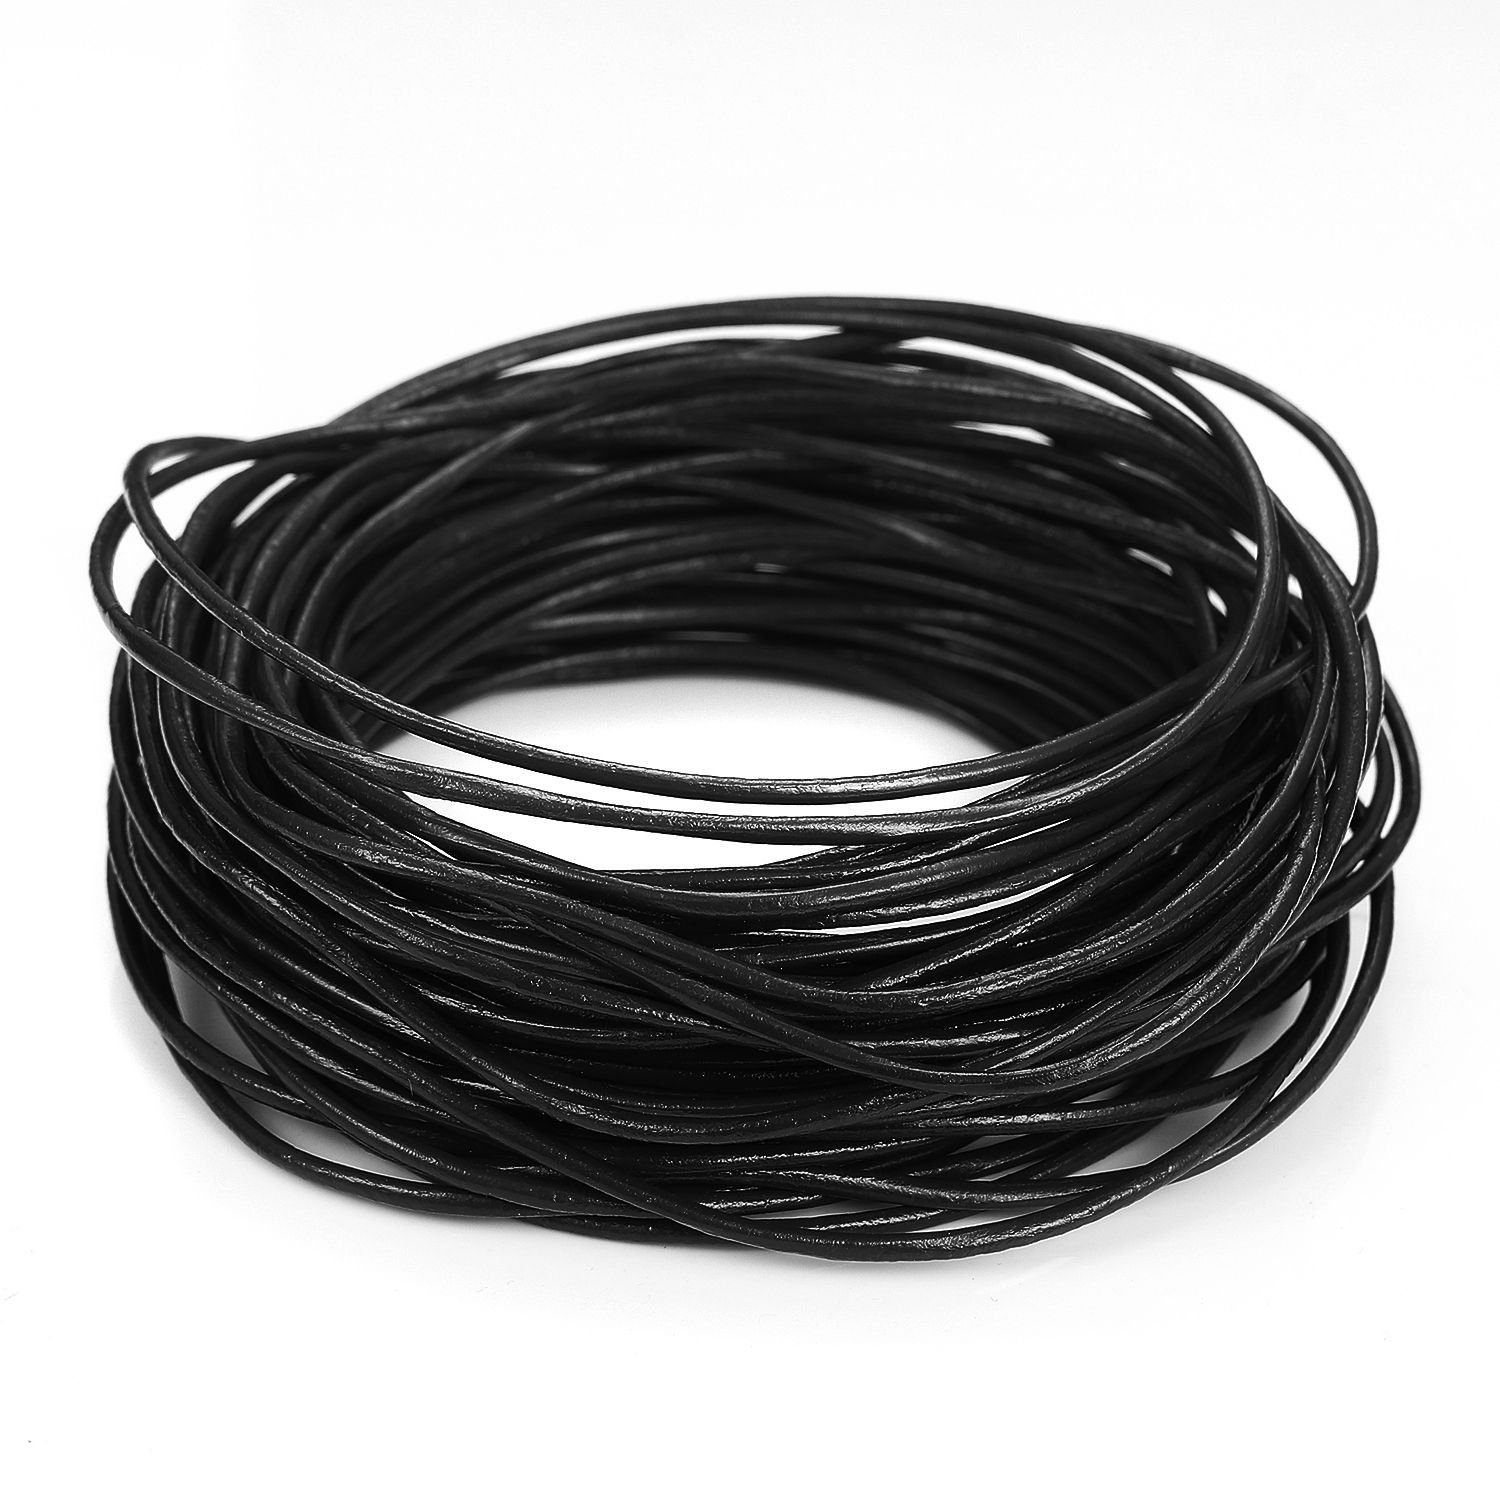 2mm Black Suede Leather String Jewelry Making DIY Thread Cords Ropes 18m 